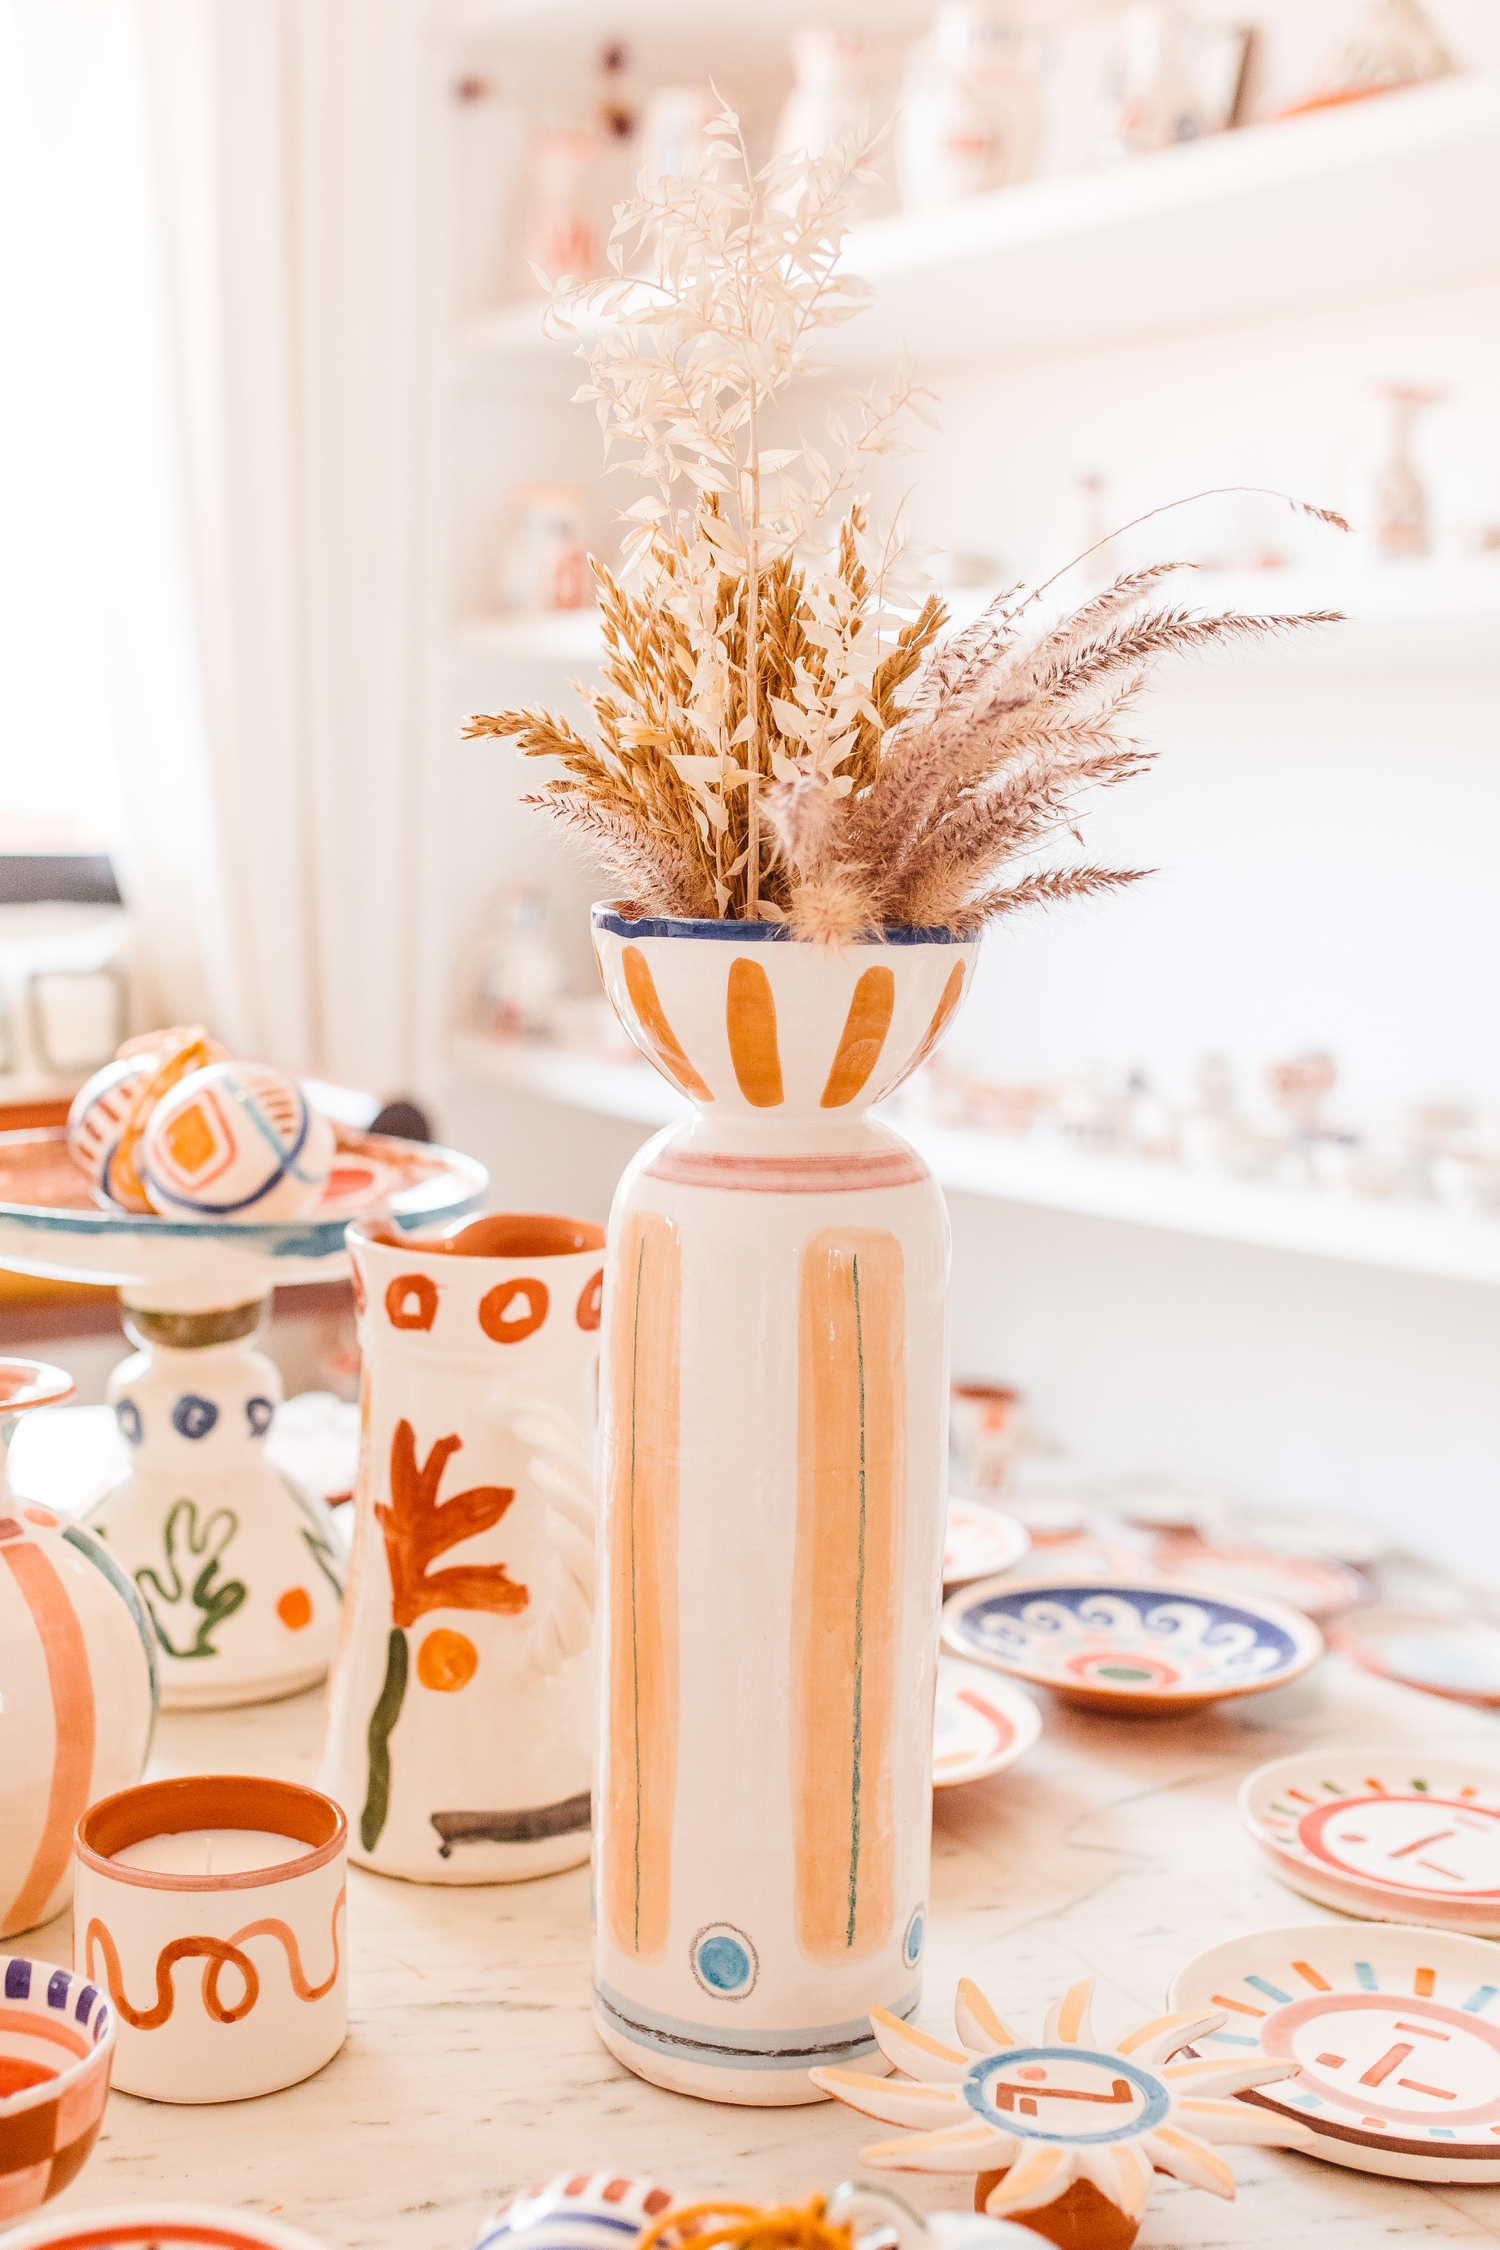 Hand painted pottery at store in Marrakesh, Morocco | Brooke Michelle Photography